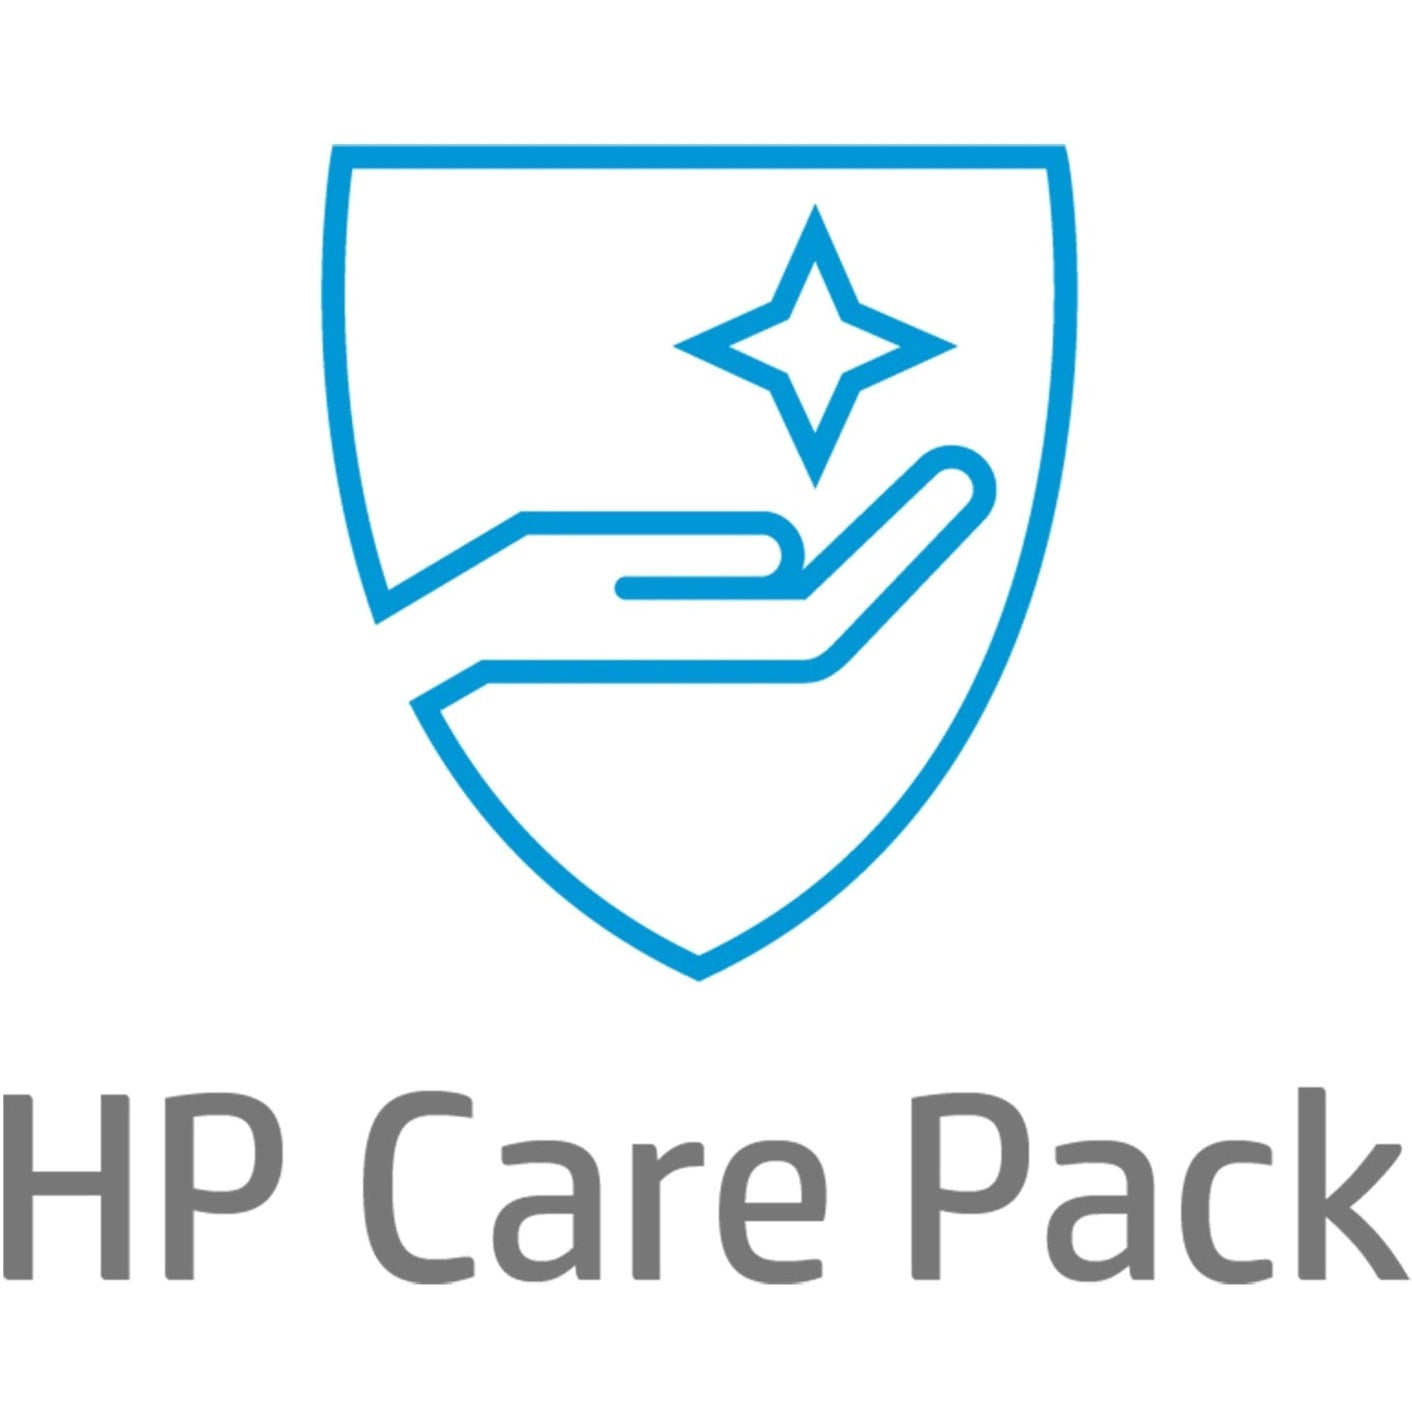 HP Care Pack Hardware Support - 4 Year - Warranty (U9DR4E)